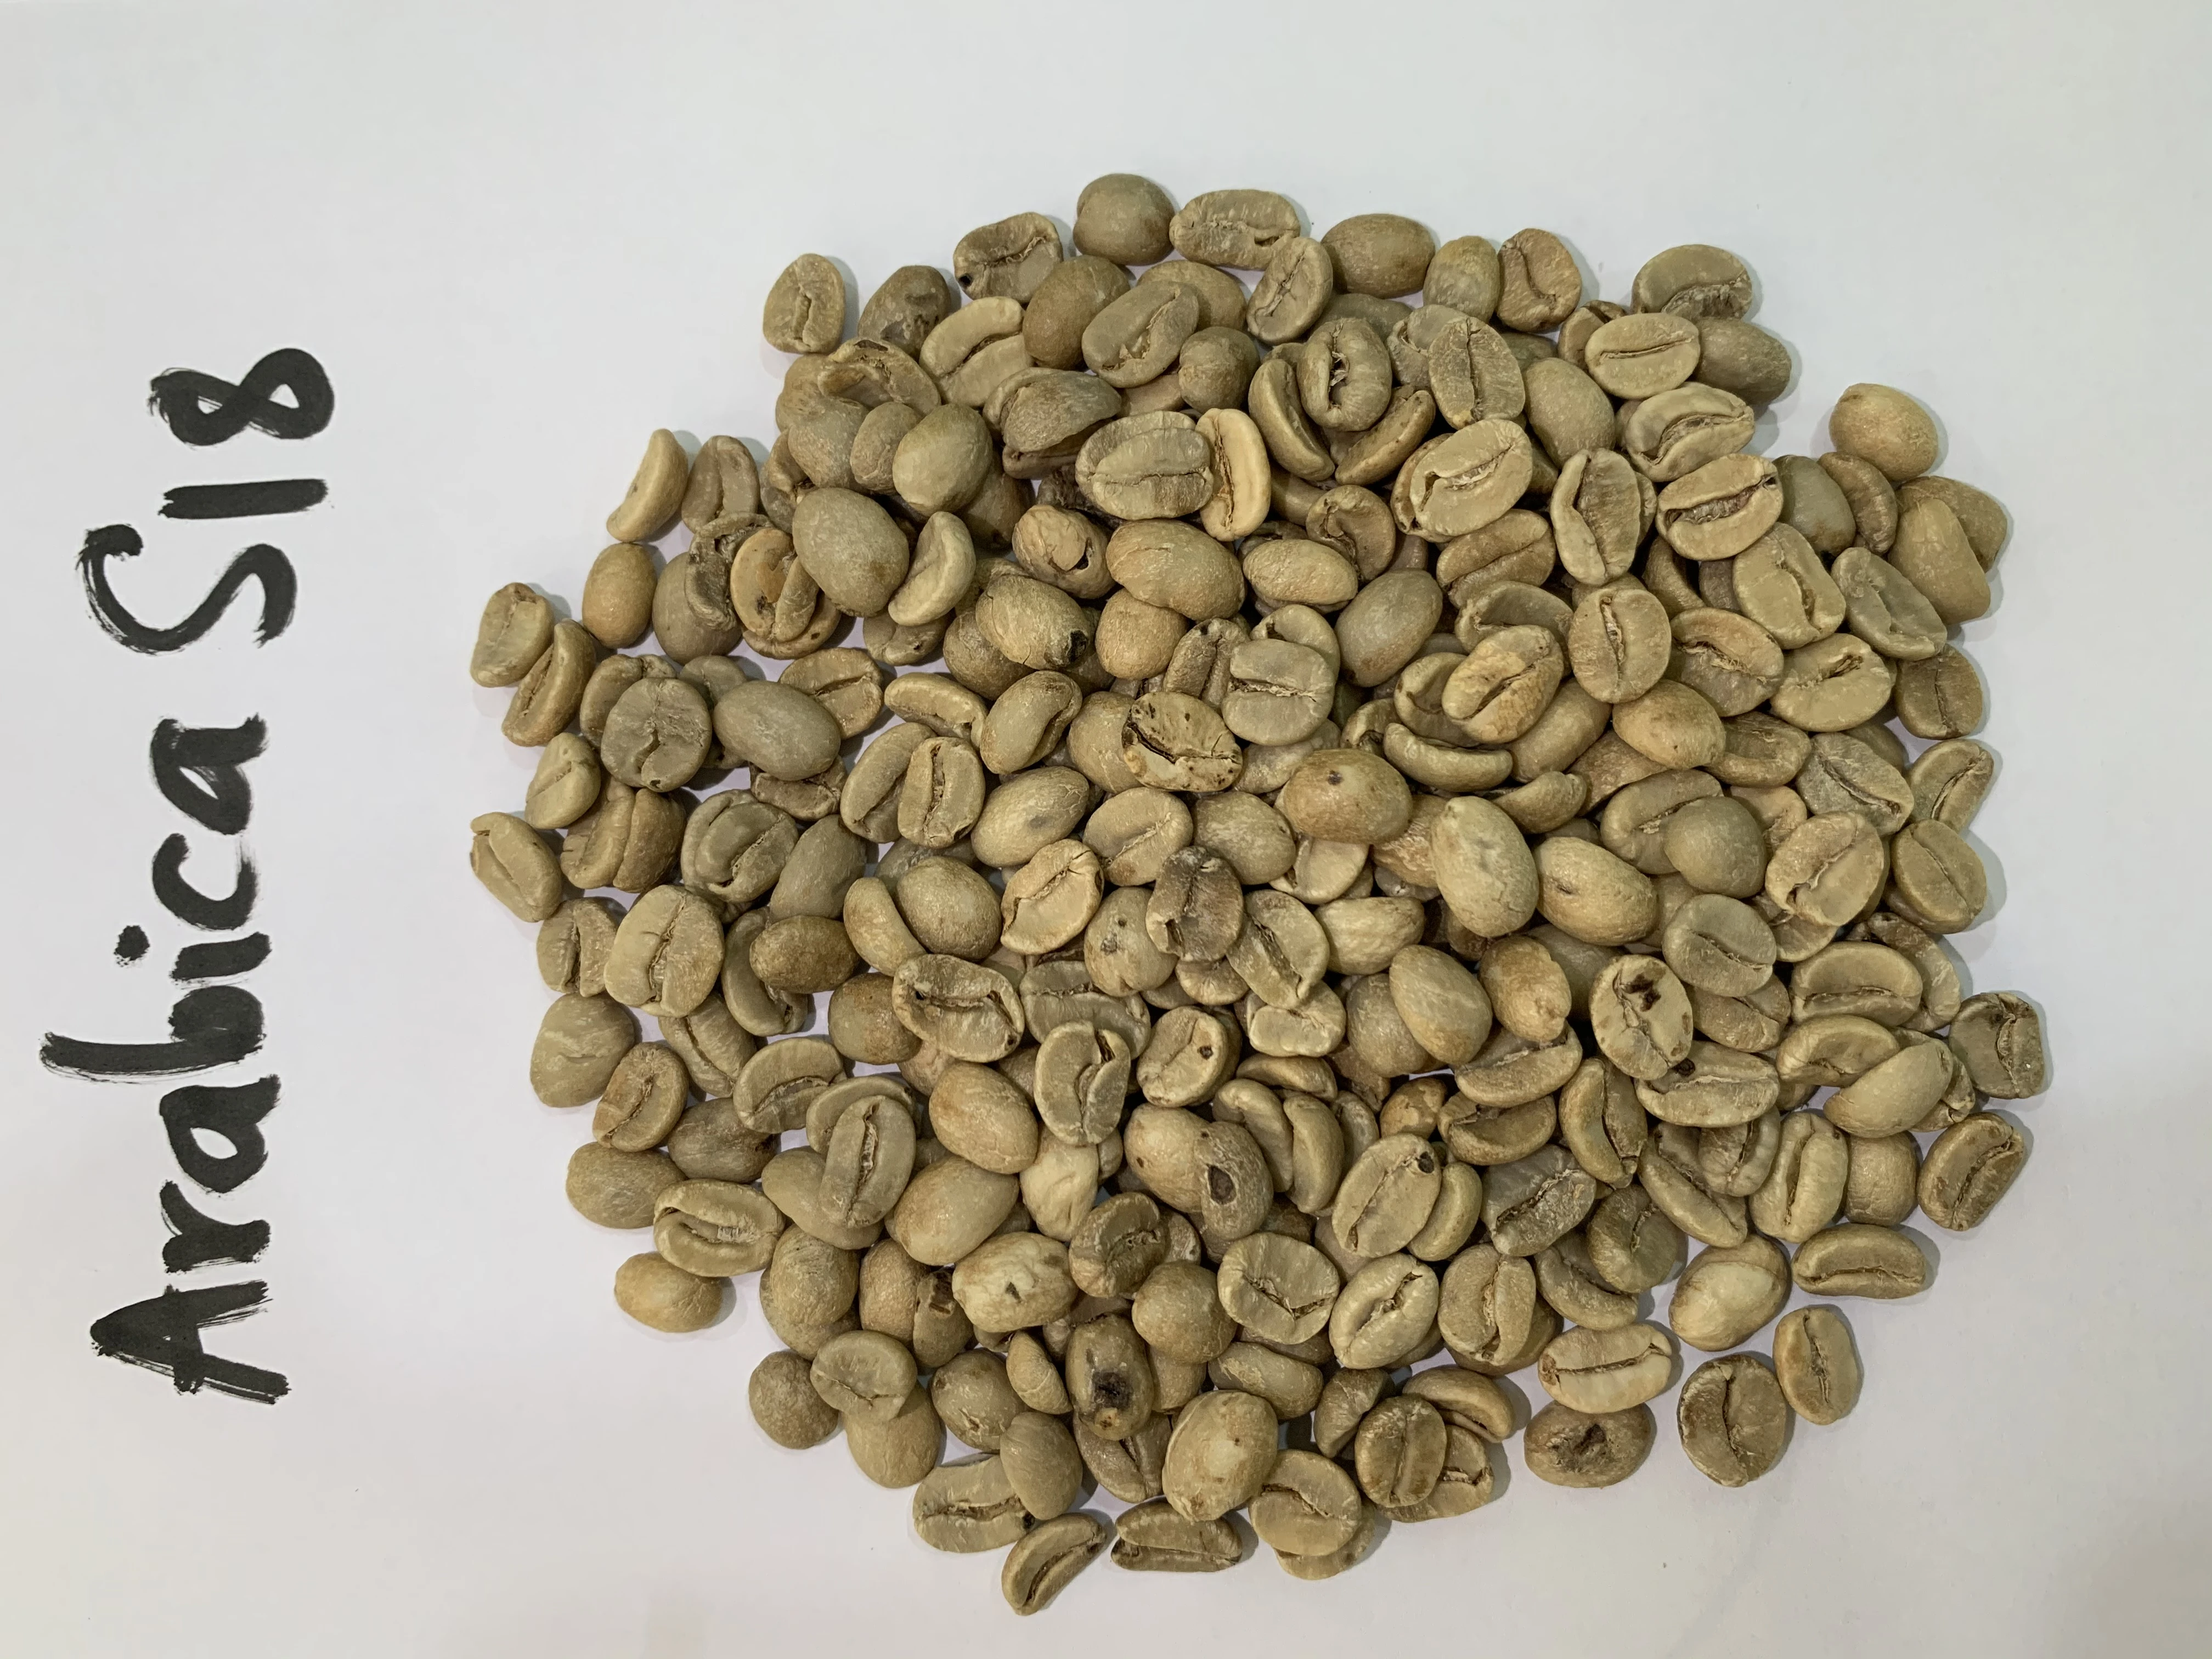 Hot Sale 2020 Unroasted Raw Price of Raw Coffee Beans Vietnam Export Products Green Roasted Ground Arabica Coffee Beans COMMON